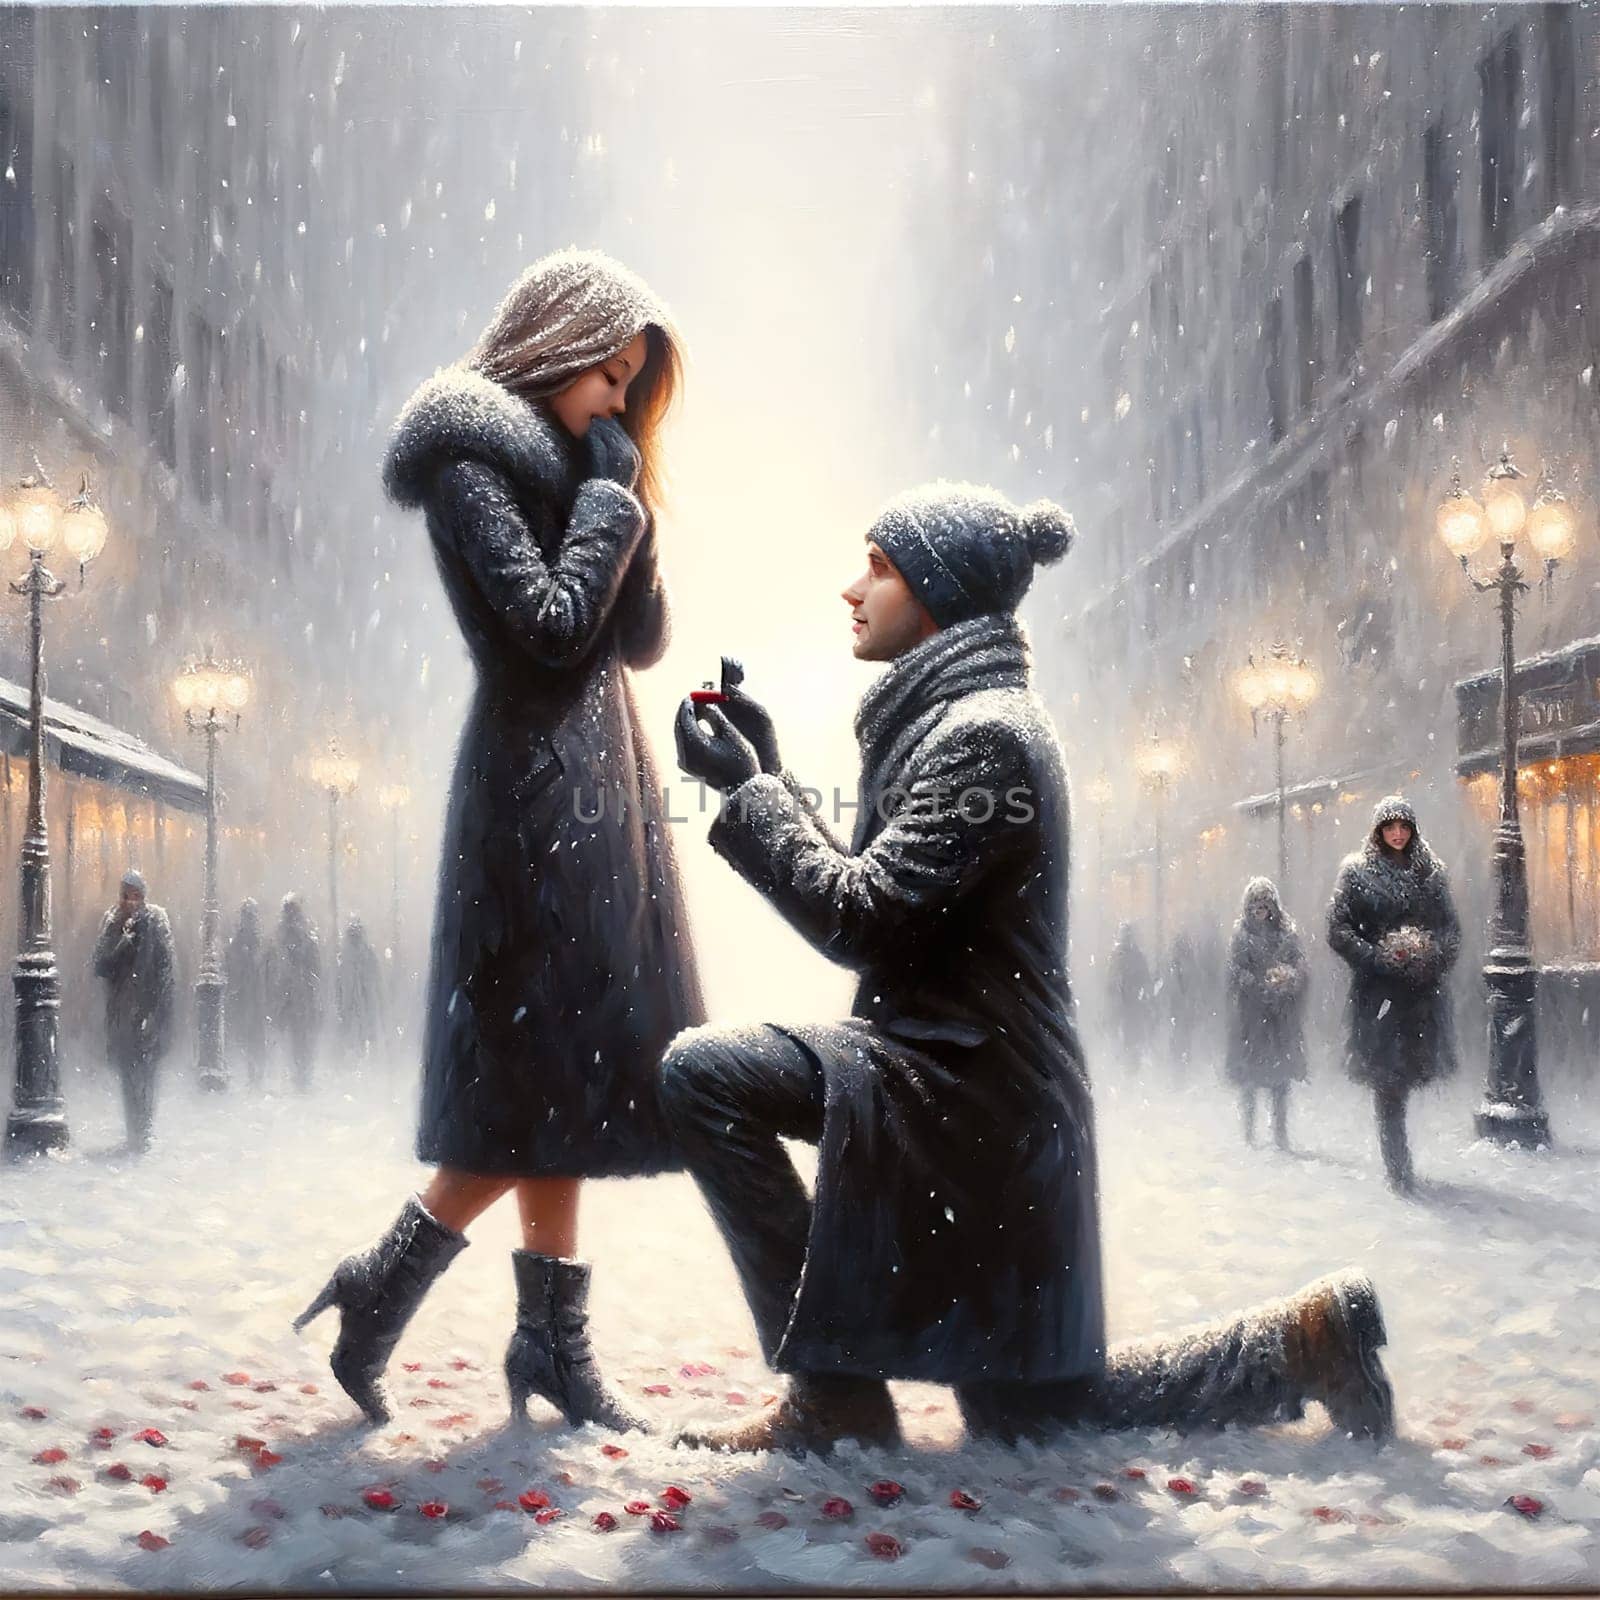 A heartfelt proposal unfolds on a snow-covered city street, with a man on one knee holding an engagement ring to a woman, as delicate snowflakes and bystanders surround them